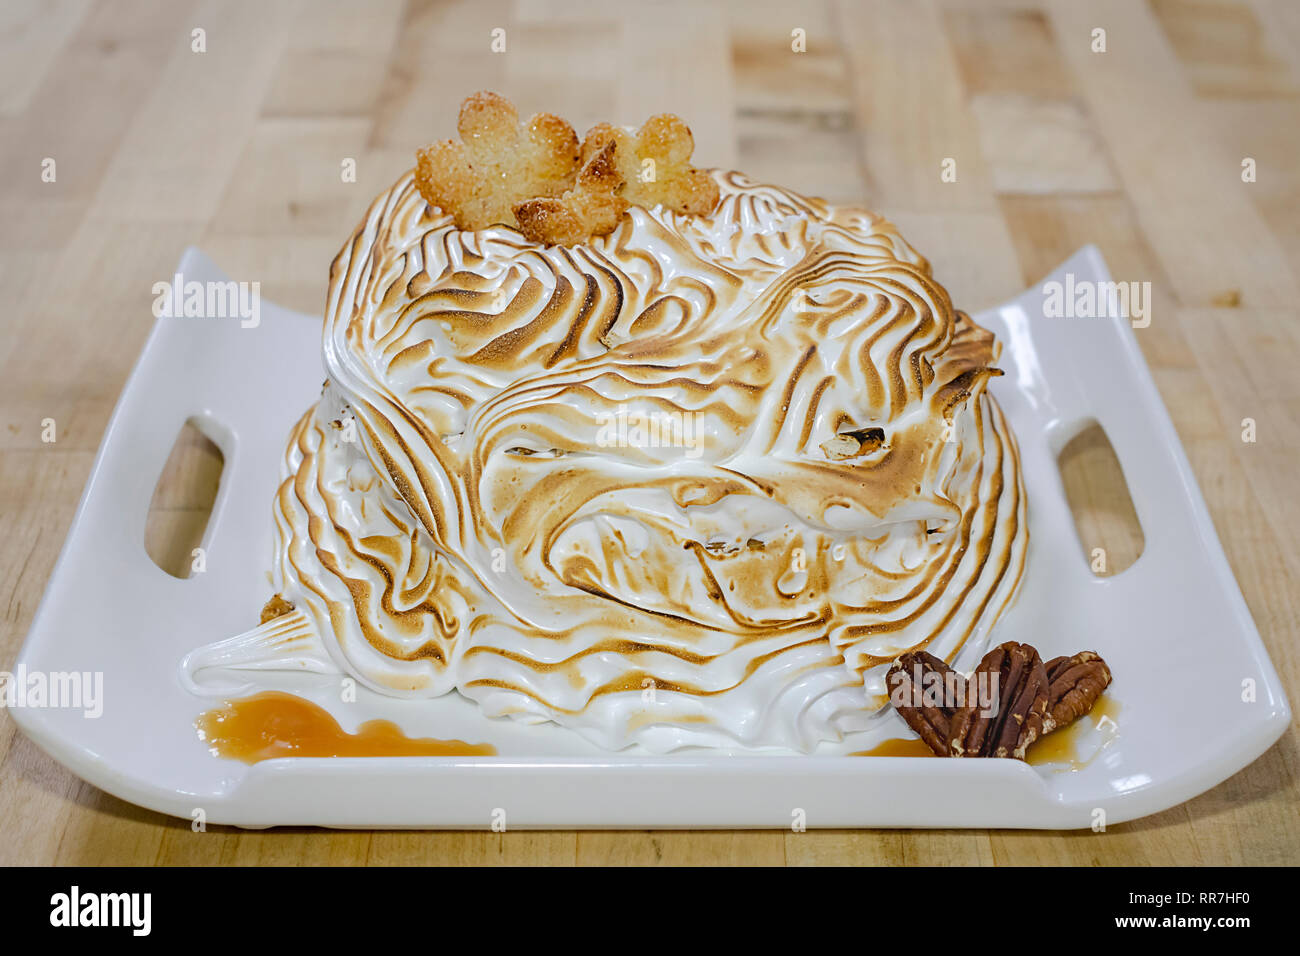 A toasted meringue dessert on a white square plate topped with sugared cookies. Stock Photo